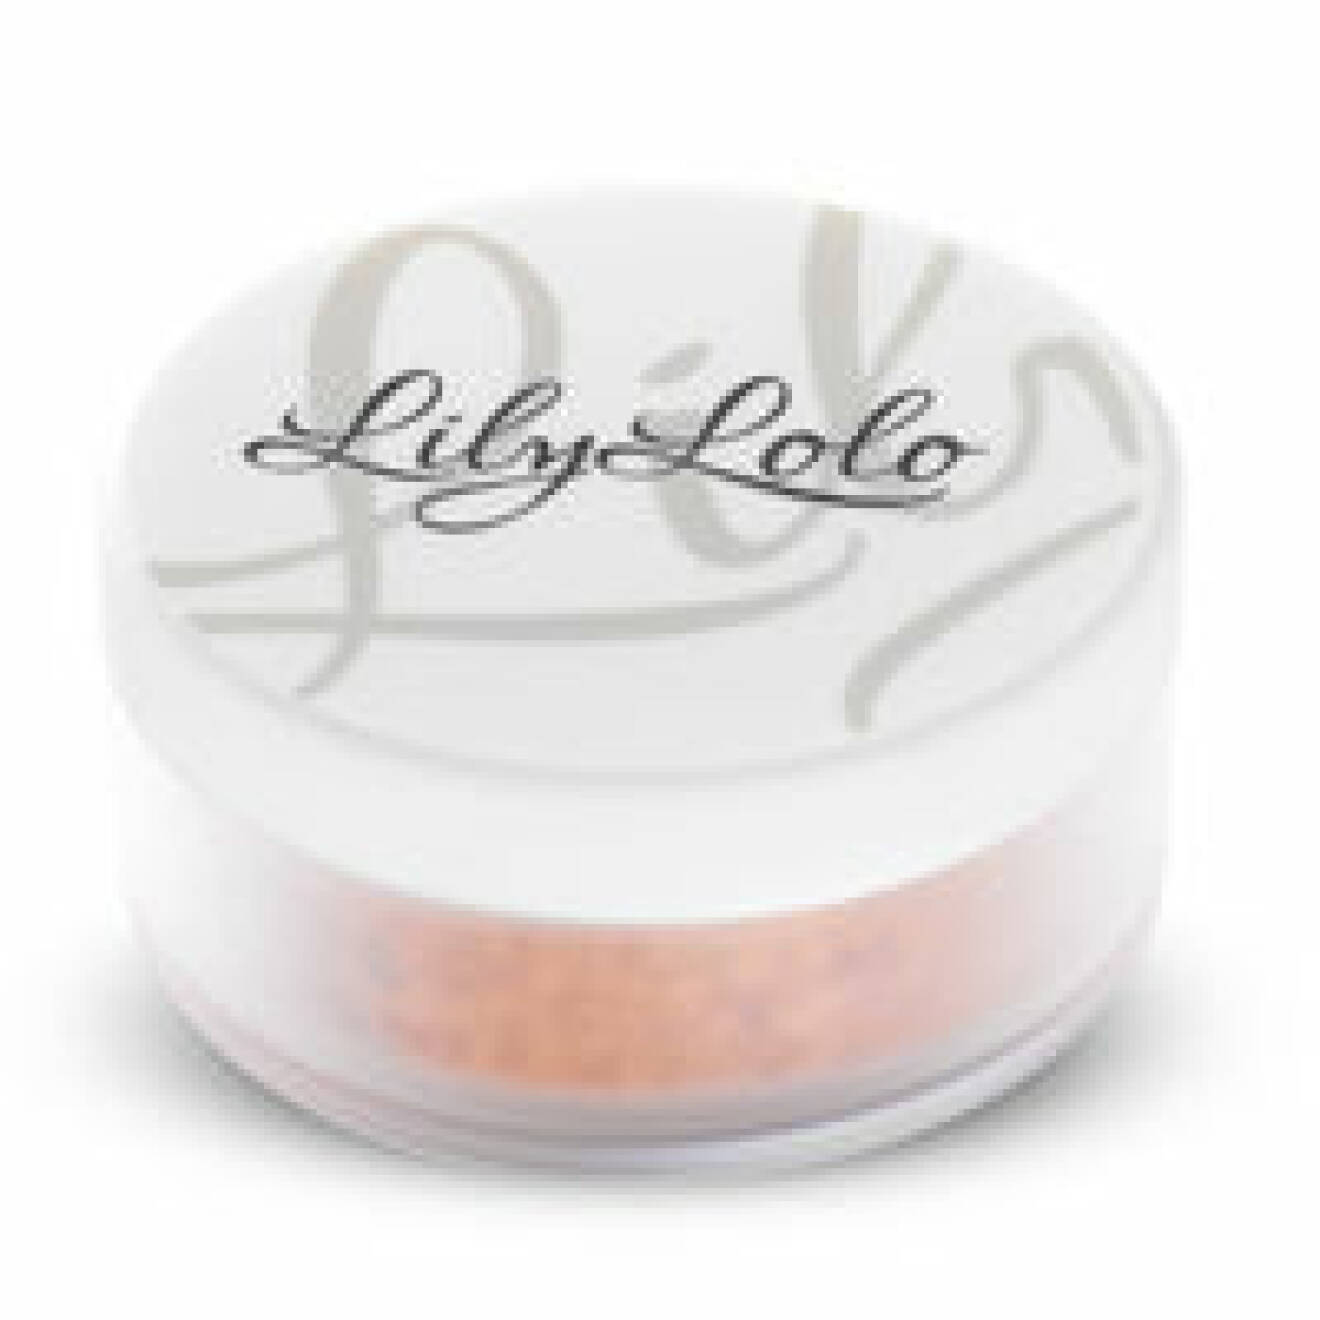 Lily Lolo Mineral Bronzer.